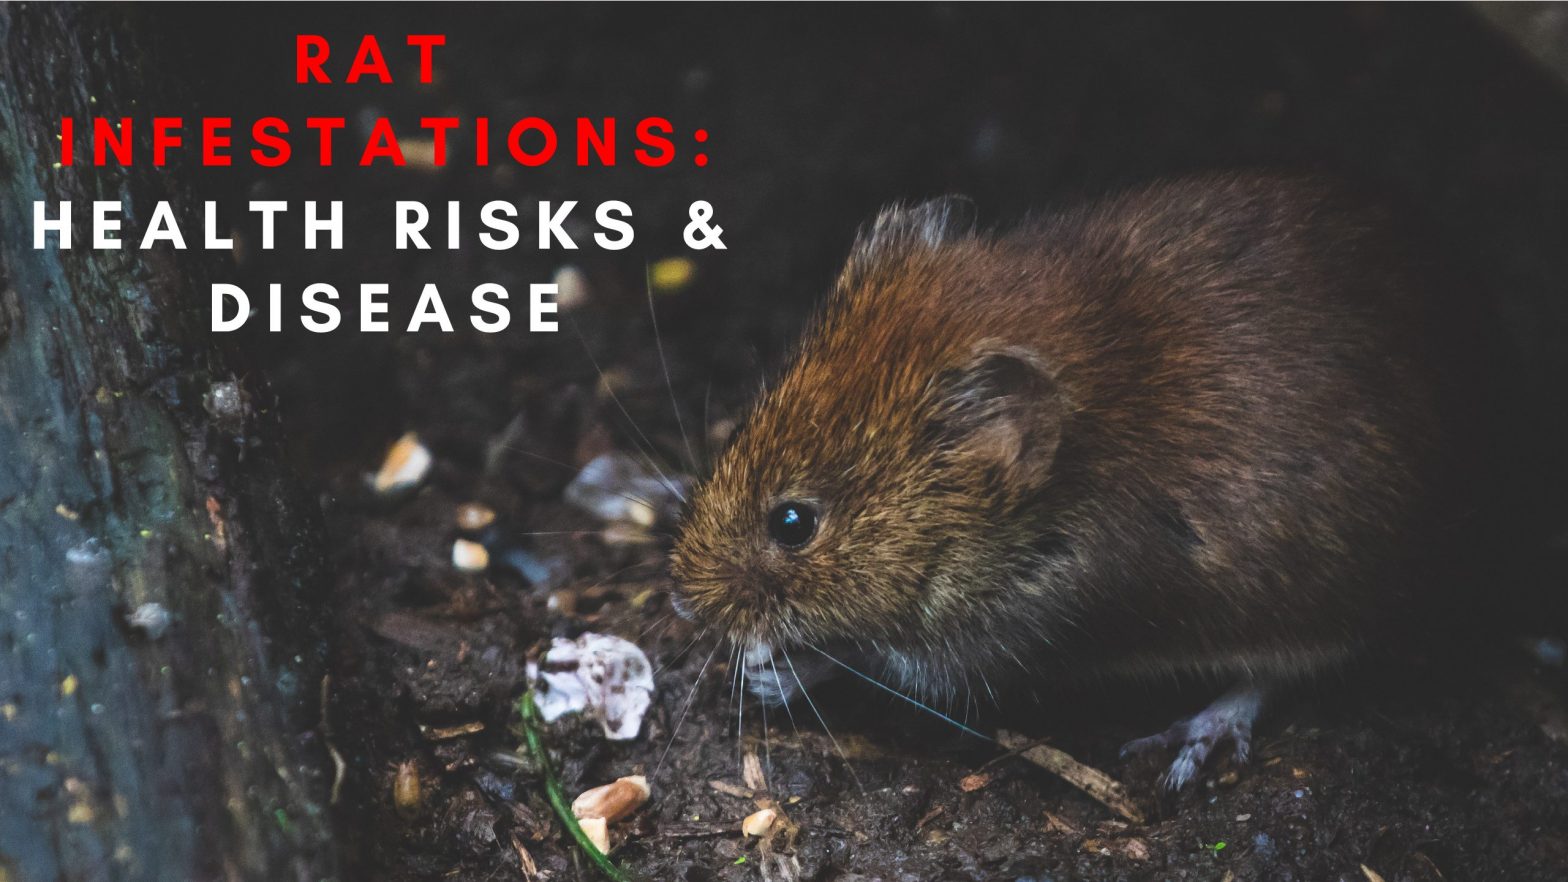 Health risks posed by rat infestations